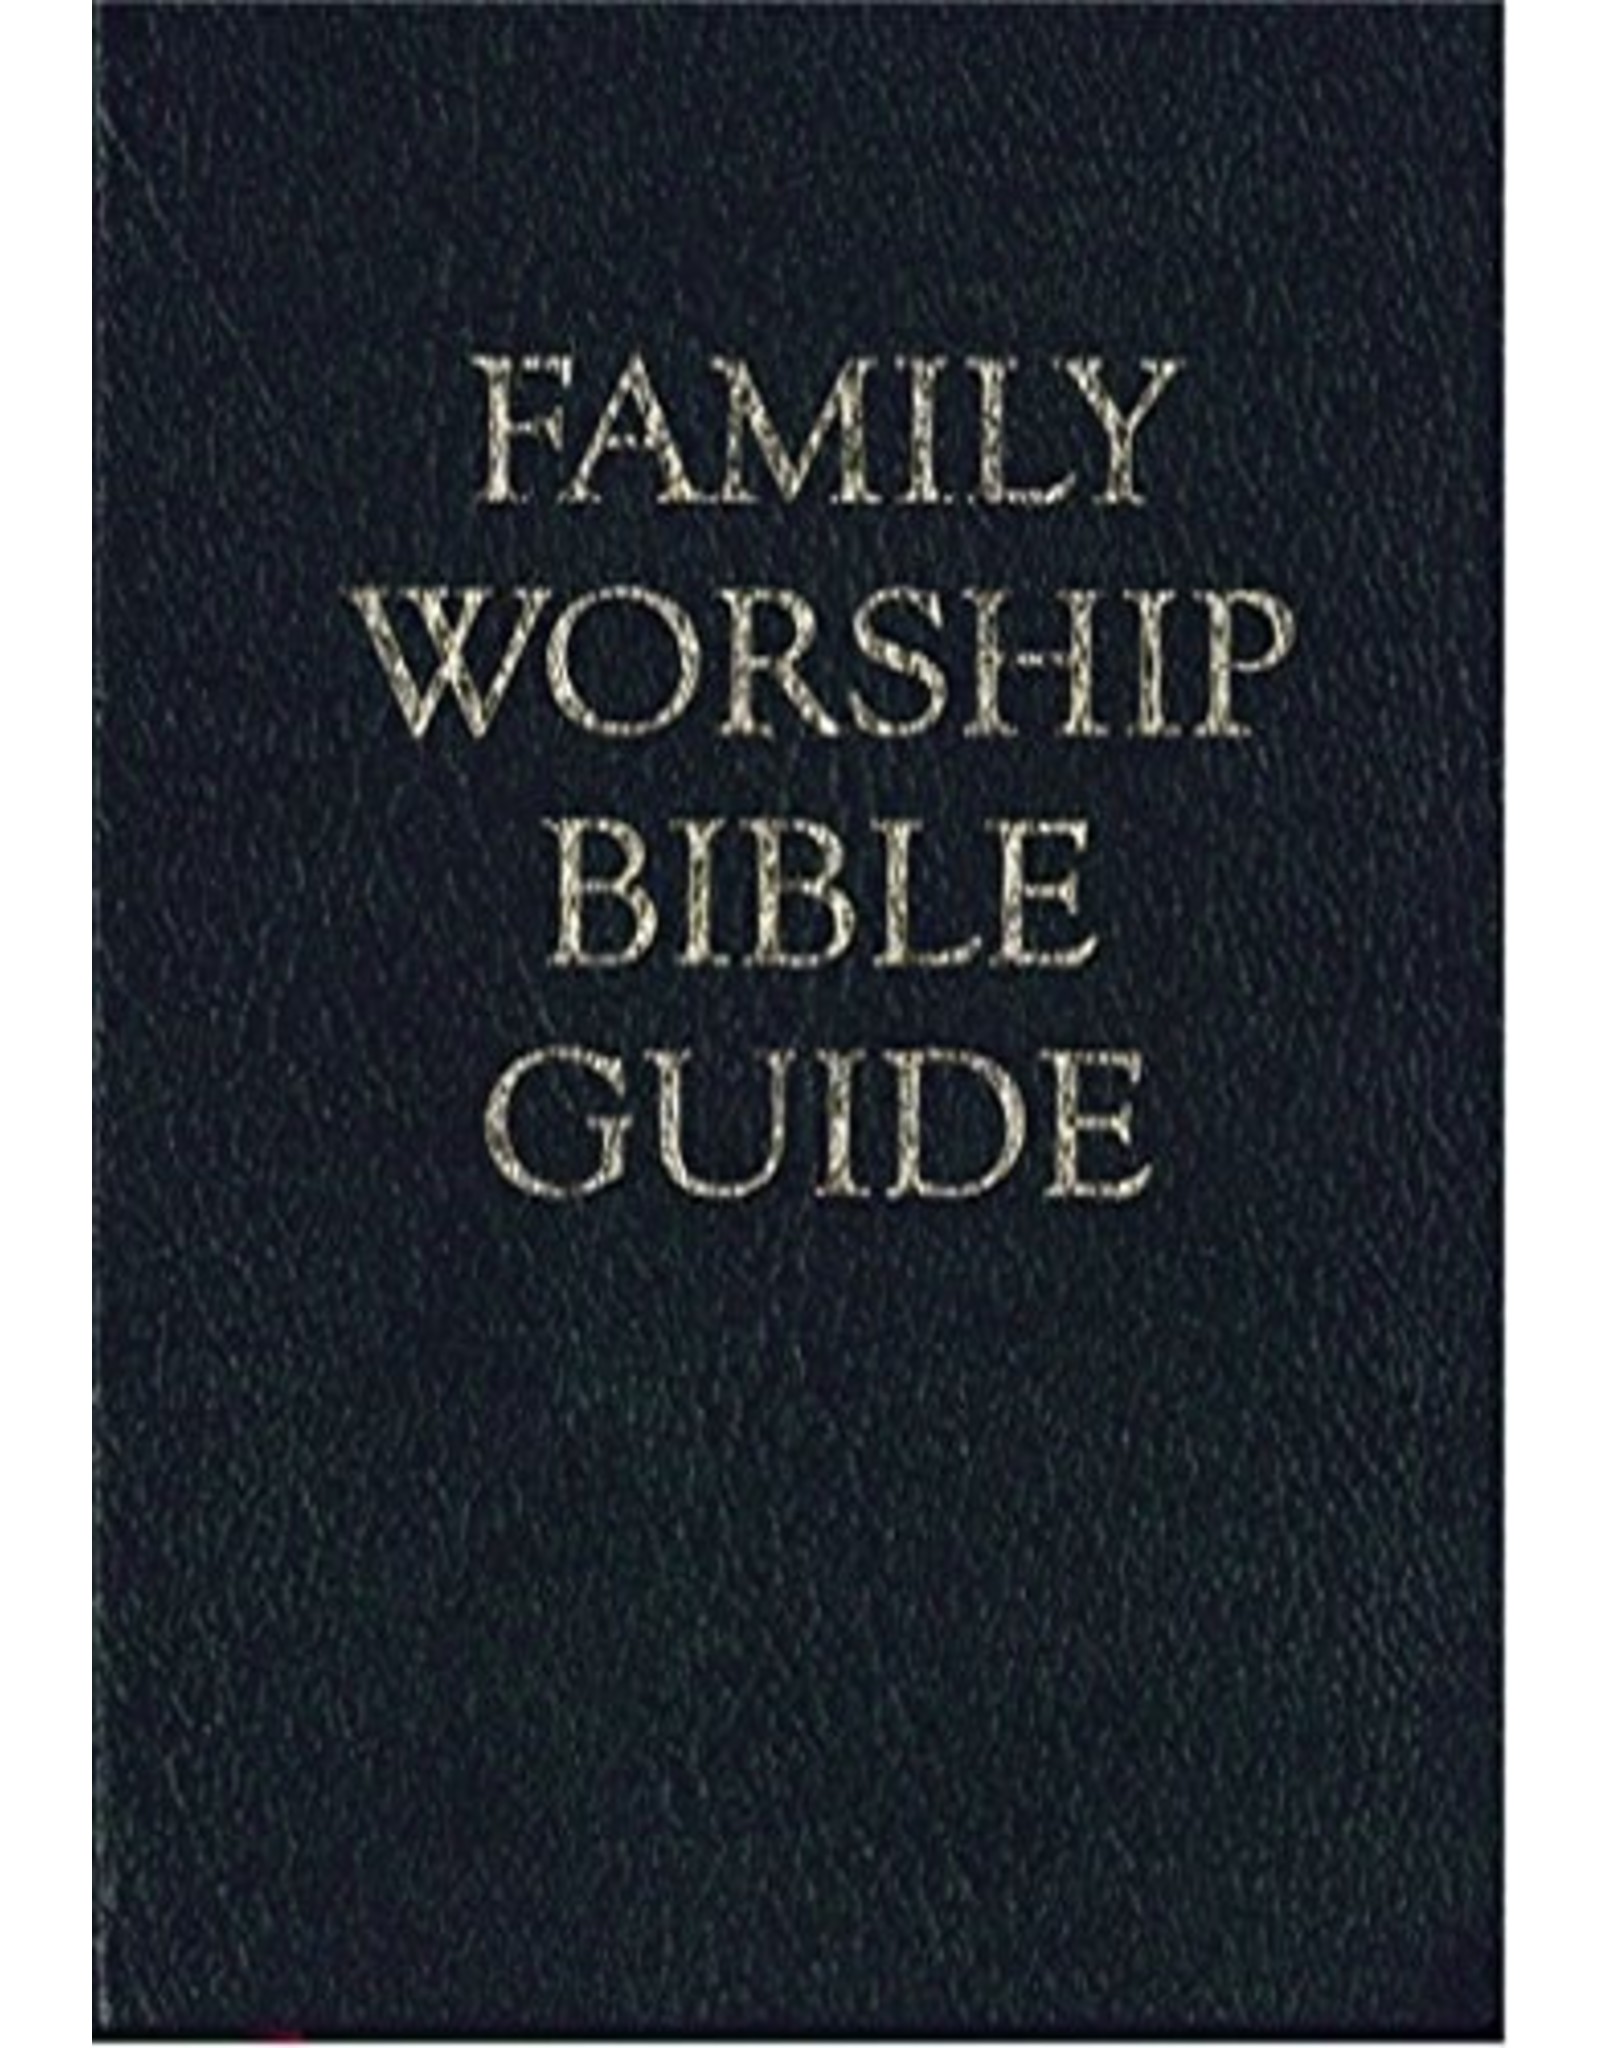 Reformation Heritage Books (RHB) Family Worship Bible Guide - Black Leather